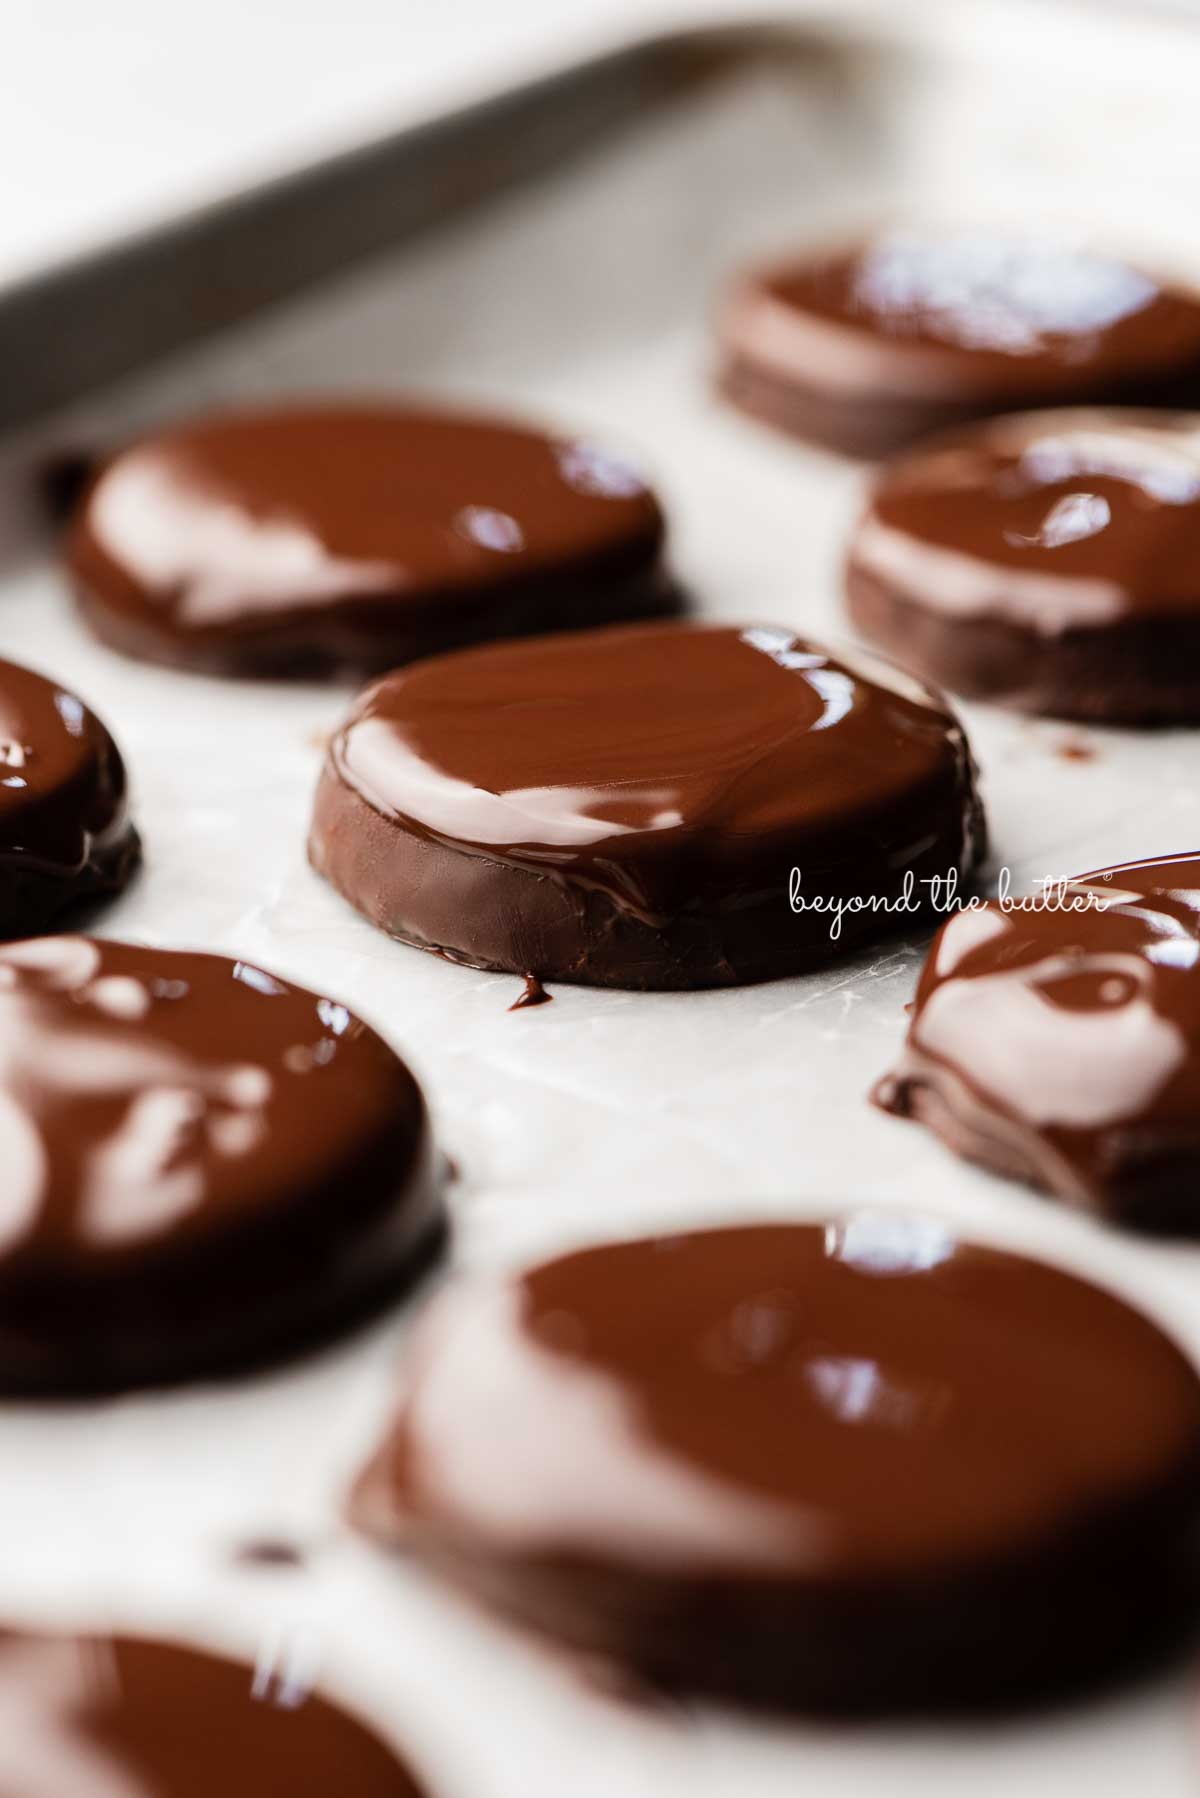 Homemade thin mints double dipped in chocolate on a wax paper lined baking sheet | © Beyond the Butter®